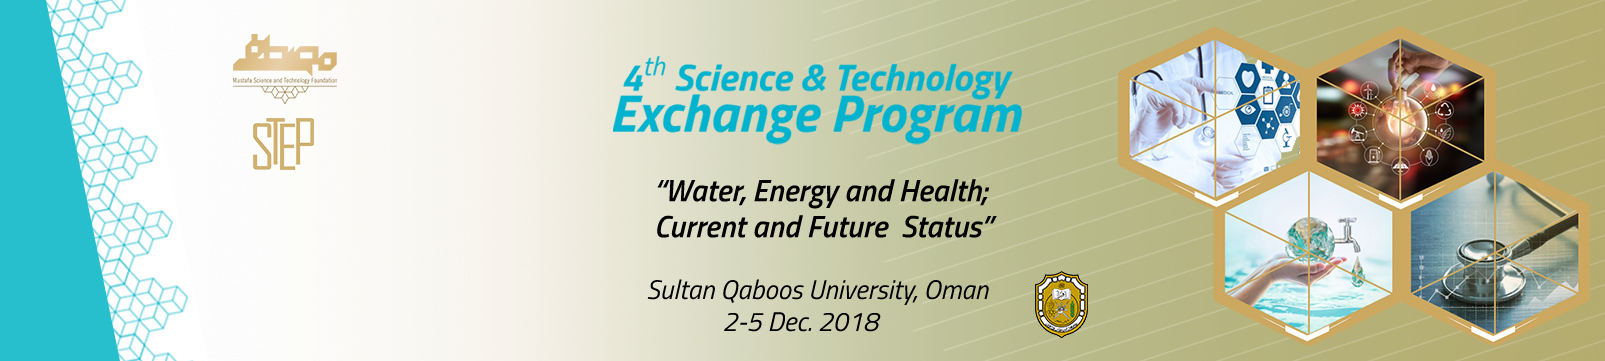 4th Science and Technology Exchange Program